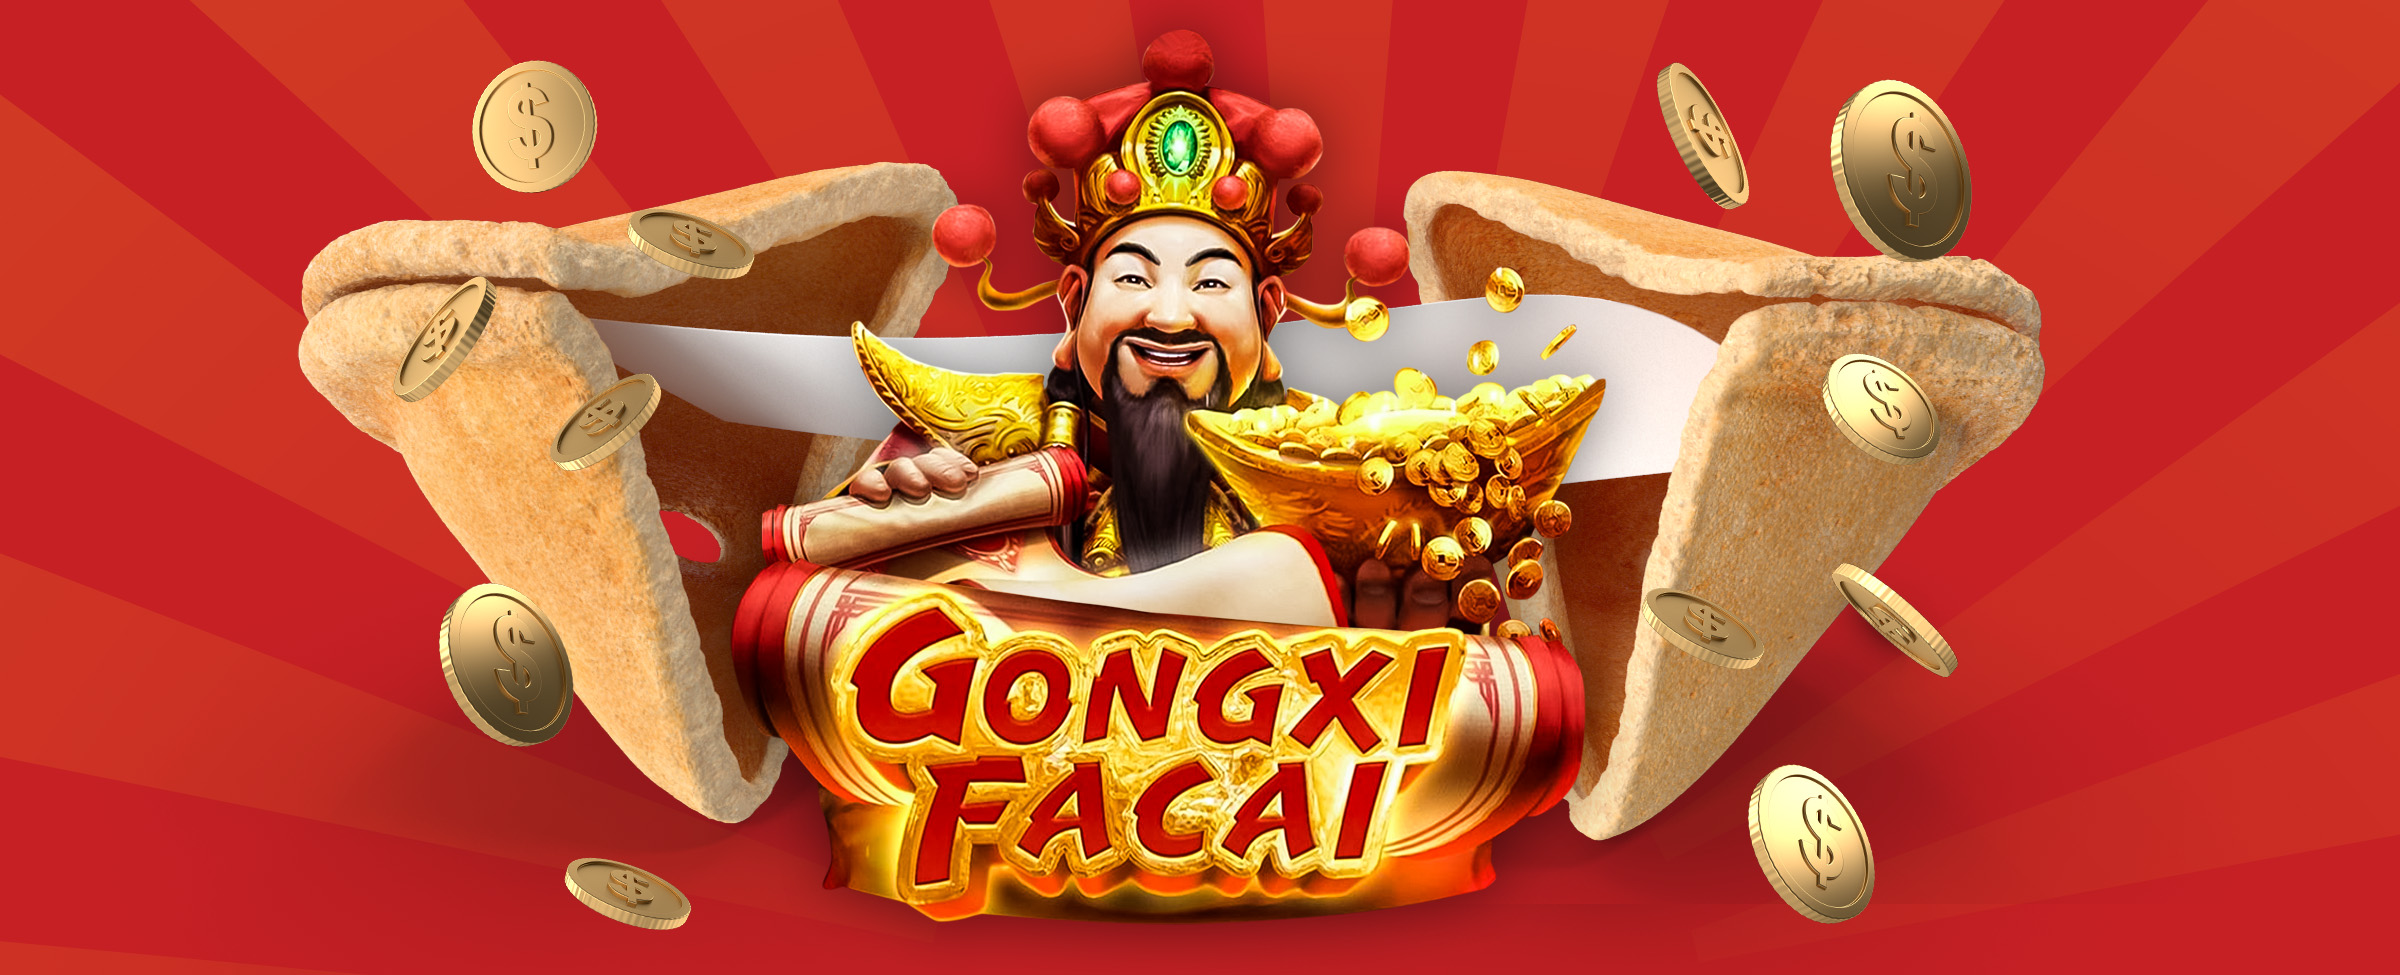 The central 3D-animated character from the Cafe Casino slot game, Gongxi Facai, is featured wedged between two broken sides of an oversized fortune cookie, surrounded by gold coins in front of a red background.